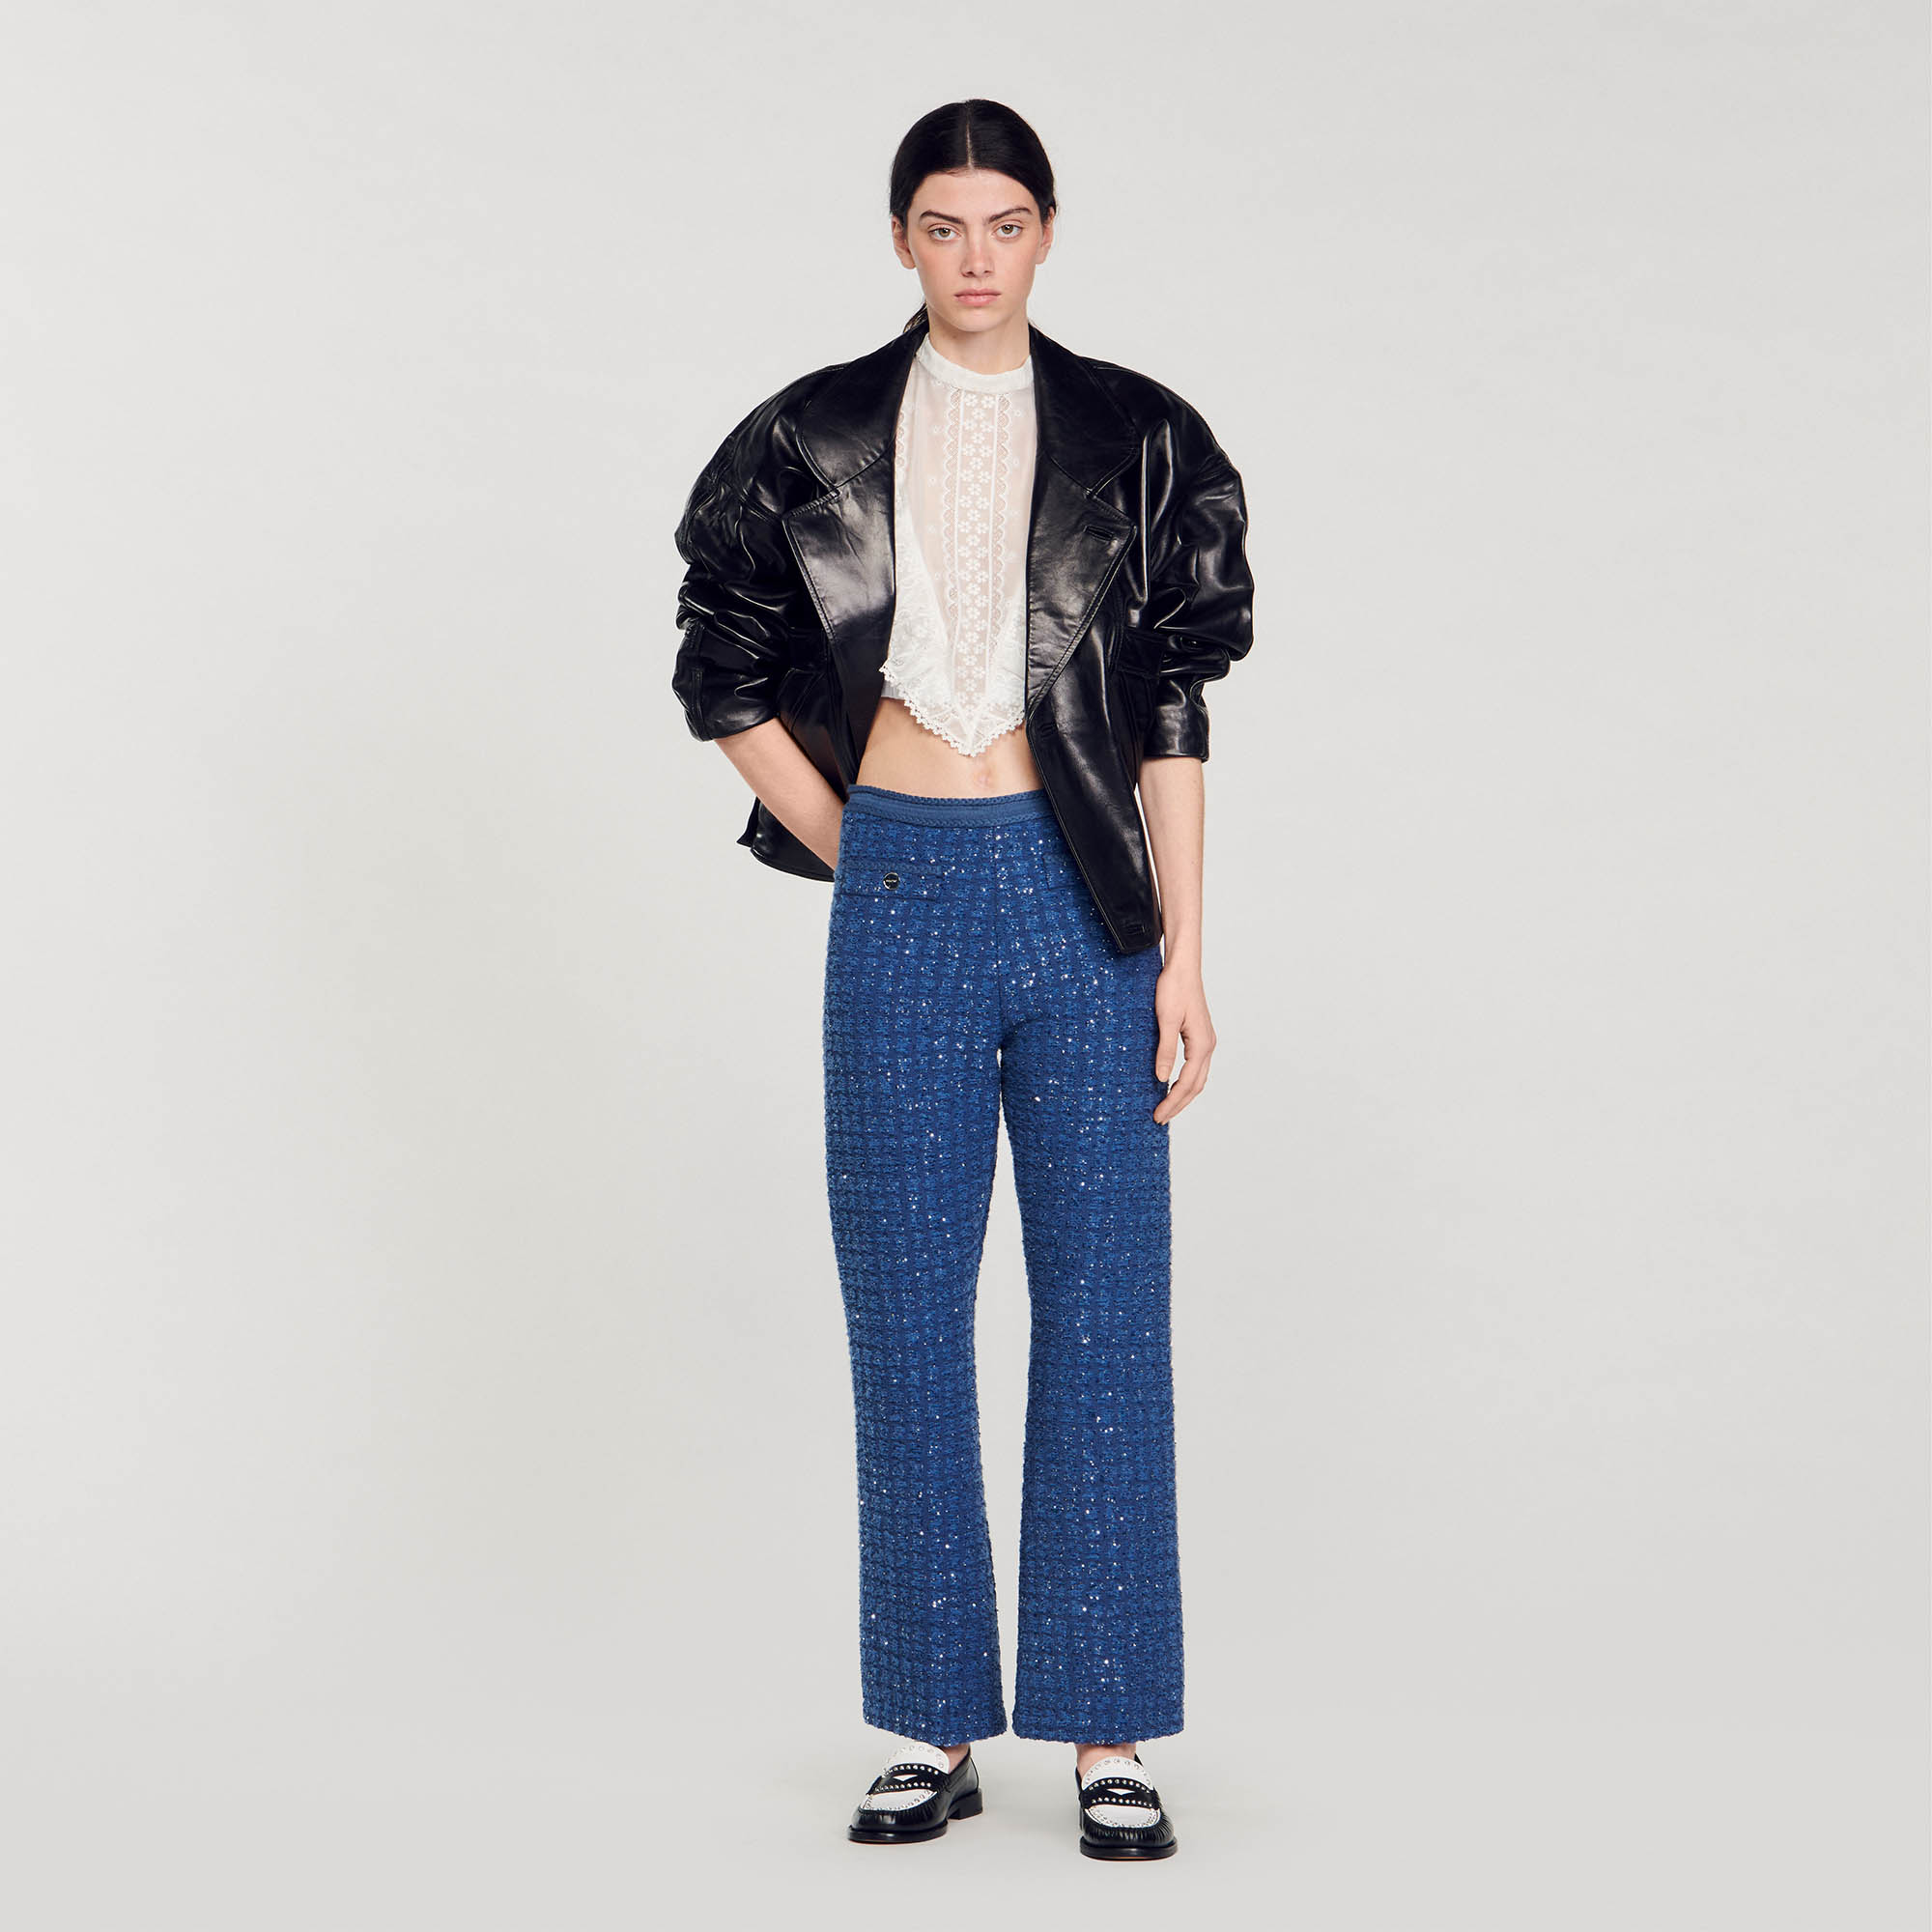 Sandro polyamide Tweed-effect shimmering knit trousers with welt pockets, braided ribbing and buttoned welt pockets